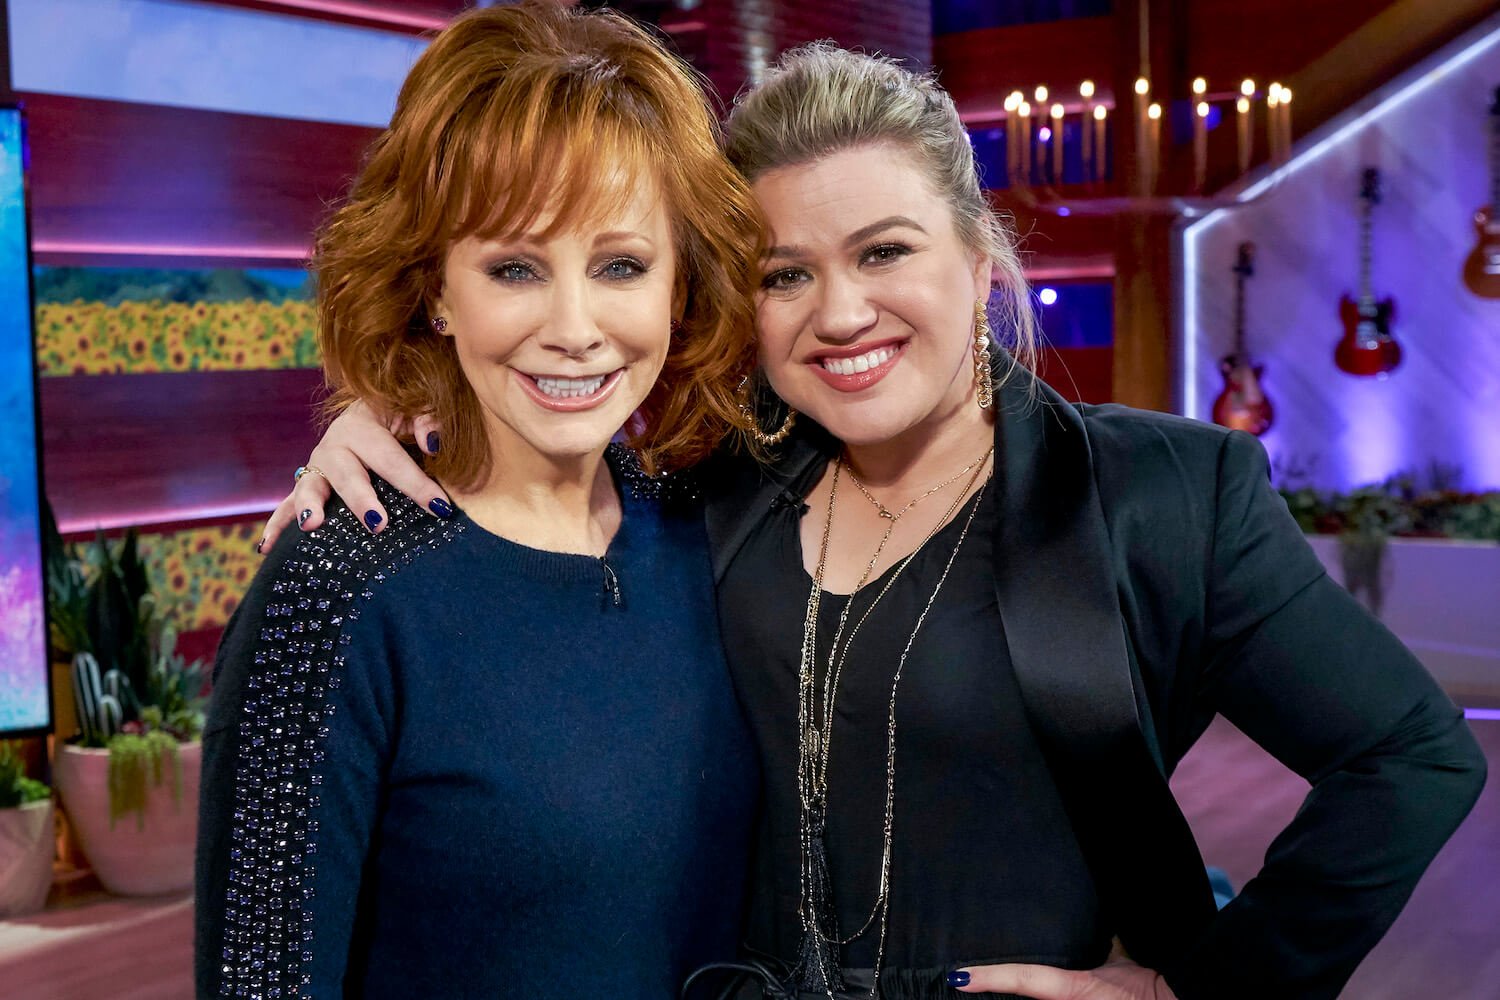 'The Voice' coaches Reba McEntire and Kelly Clarkson hugging each other and smiling